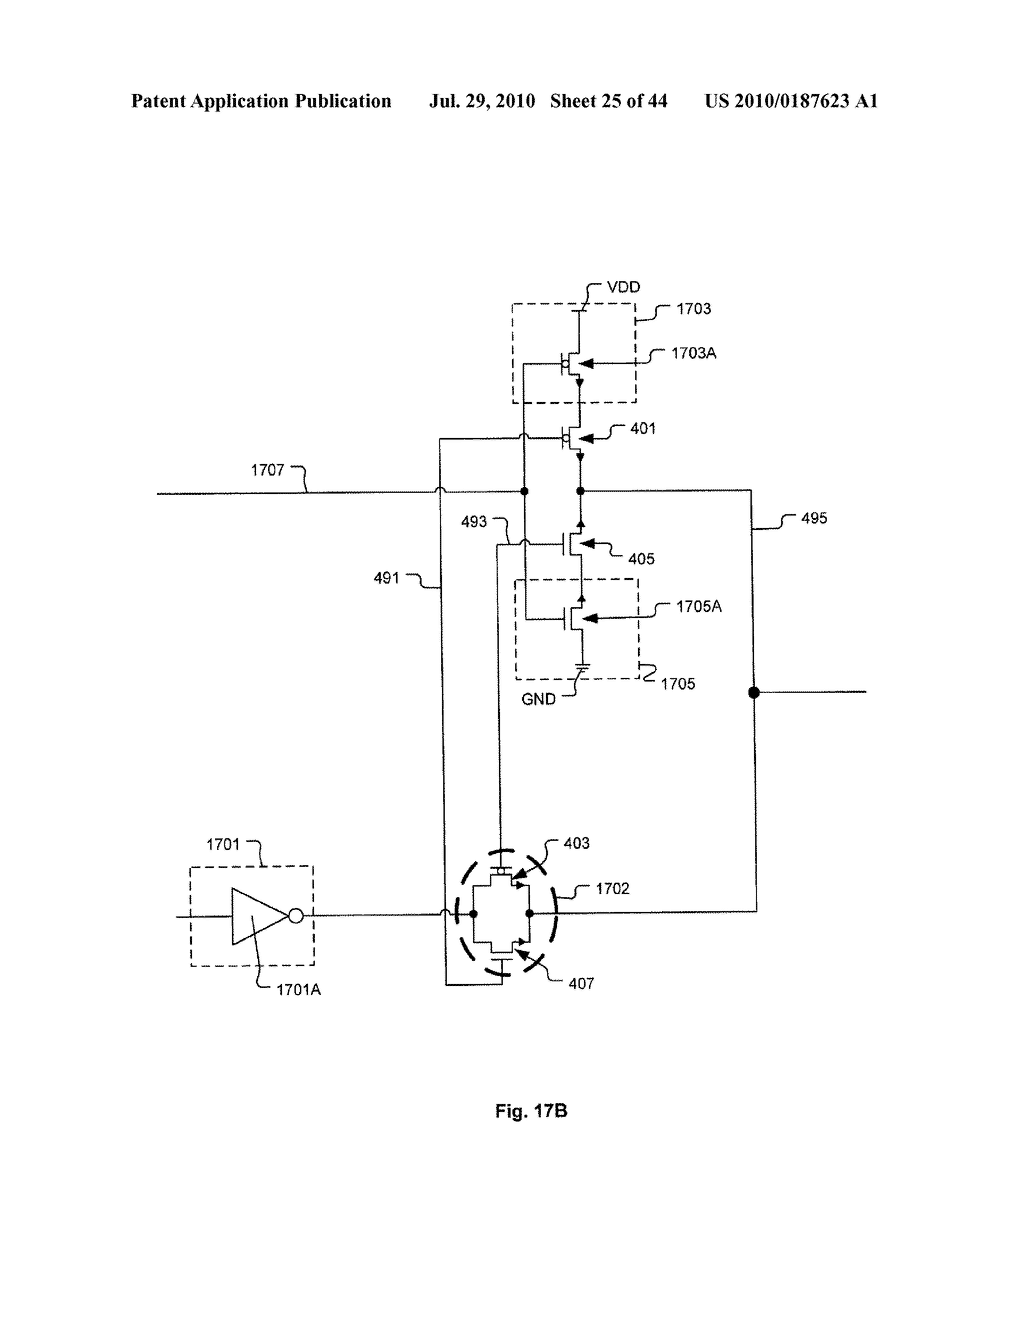 Linear Gate Level Cross-Coupled Transistor Device with Cross-Coupled Transistors Defined on Two Gate Electrode Tracks with Crossing Gate Electrode Connections - diagram, schematic, and image 26